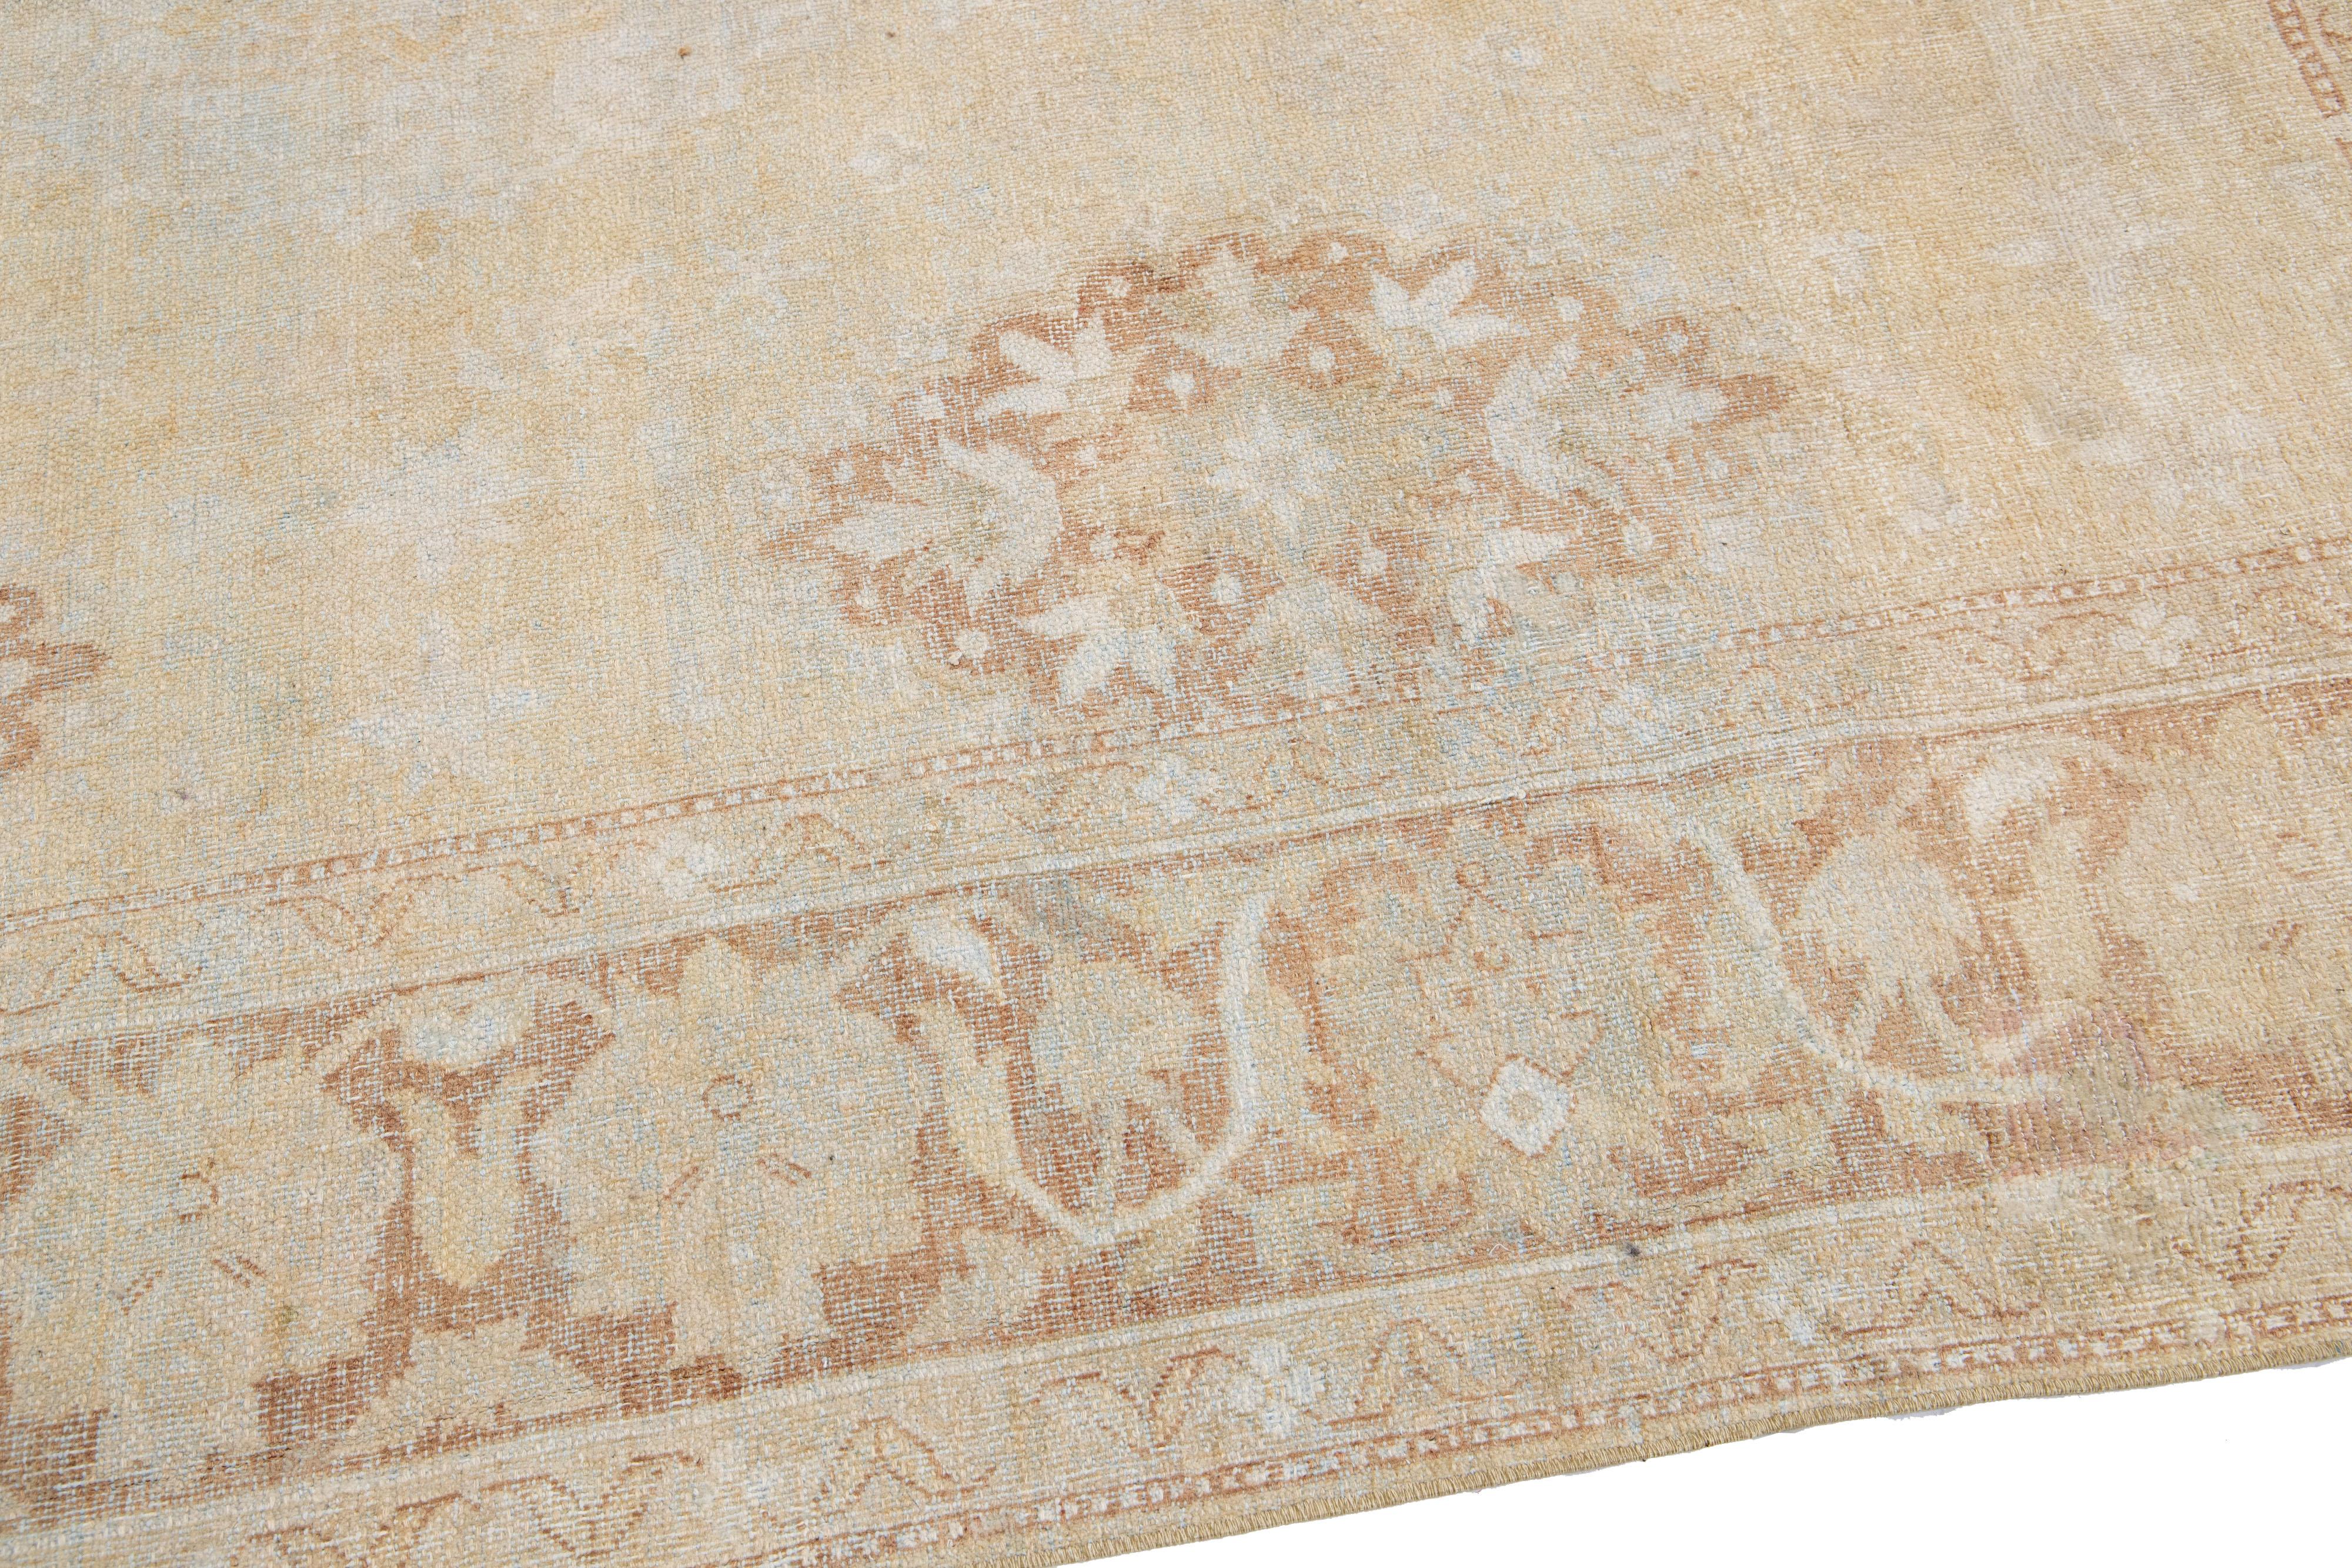 Beige Antique Indian Agra Handmade Square Wool Rug with Allover Motif In Good Condition For Sale In Norwalk, CT